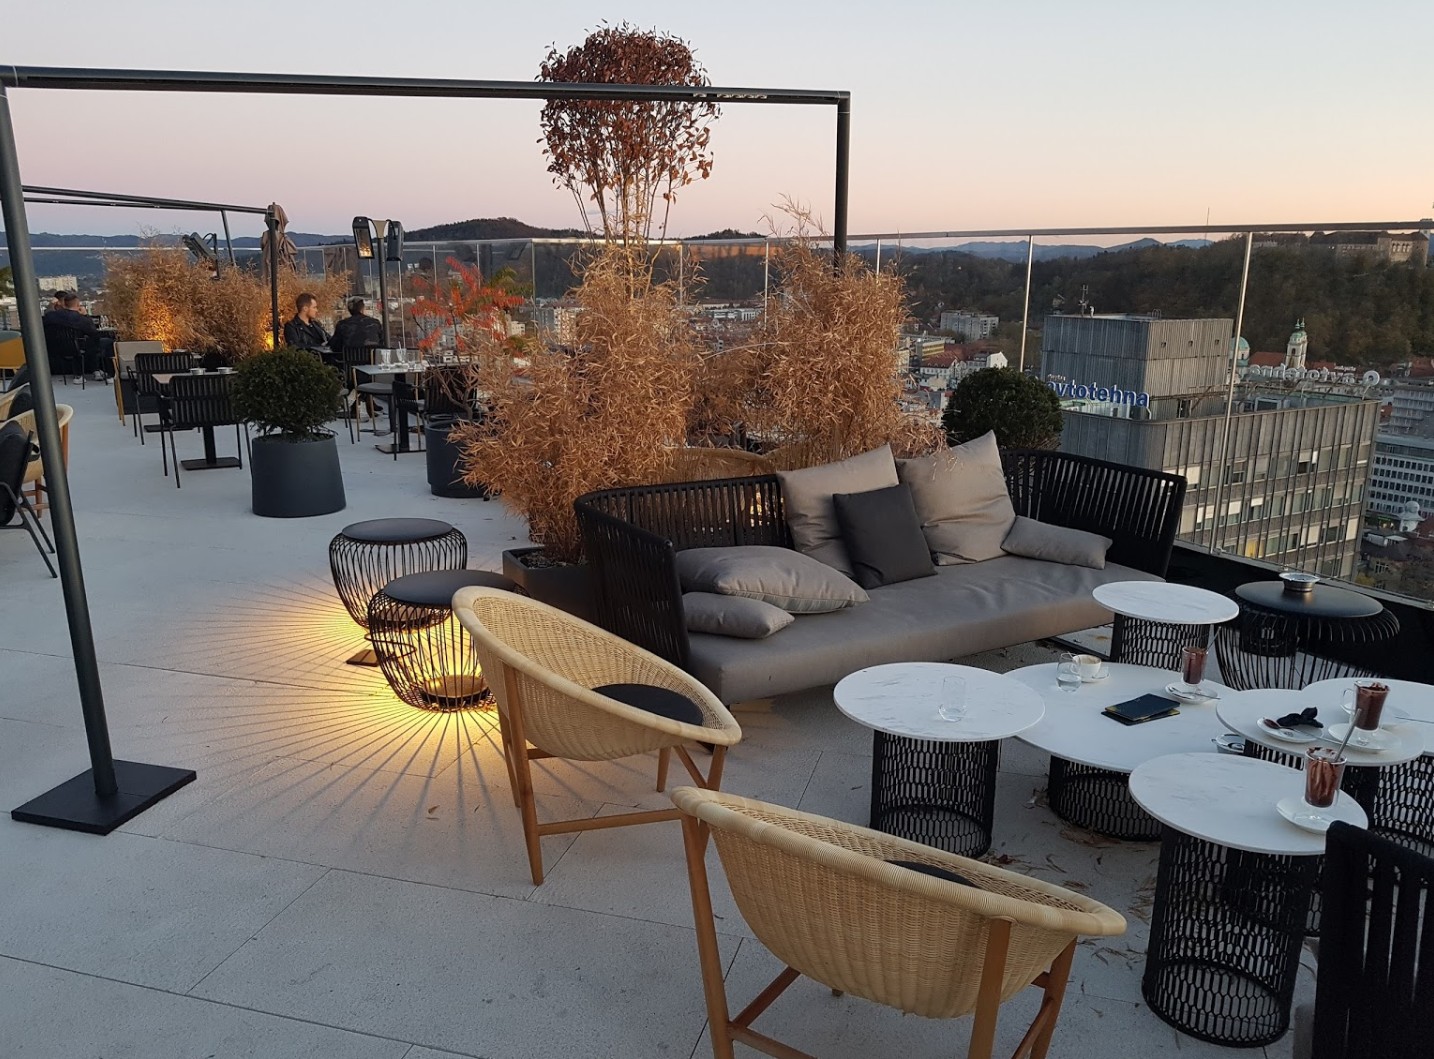 Better Hospitality Experience for Guests on This Rooftop Deck with Electrical Services Hidden Below the Decking Surface